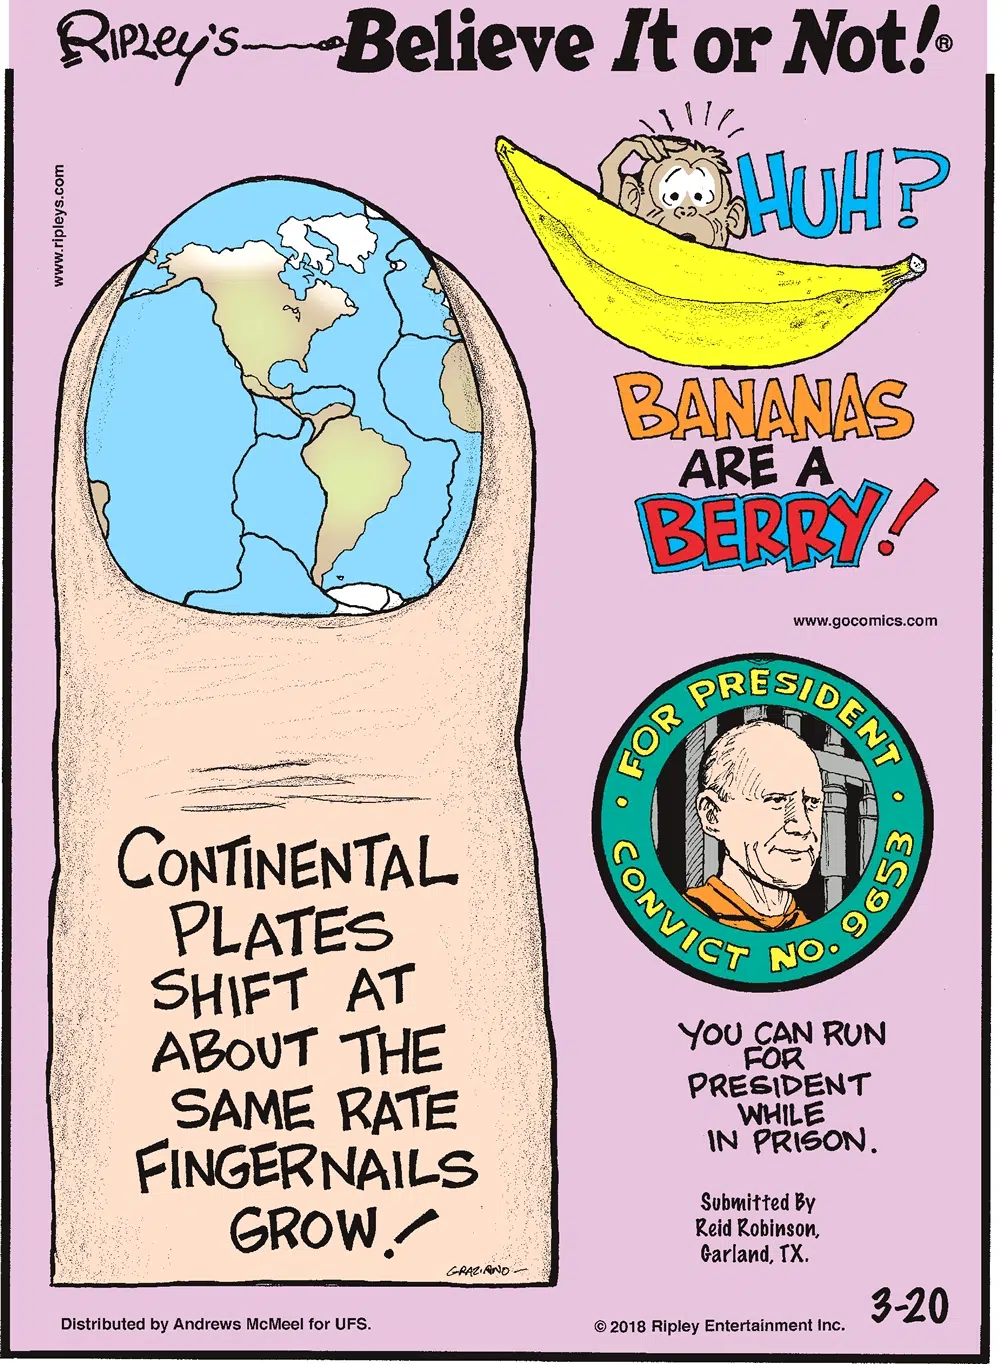 Continental plates shift at about the same rate fingernails grow!-------------------- Bananas are a berry!-------------------- You can run for president while in prison. Submitted by Reid Robinson, Garland, TX.